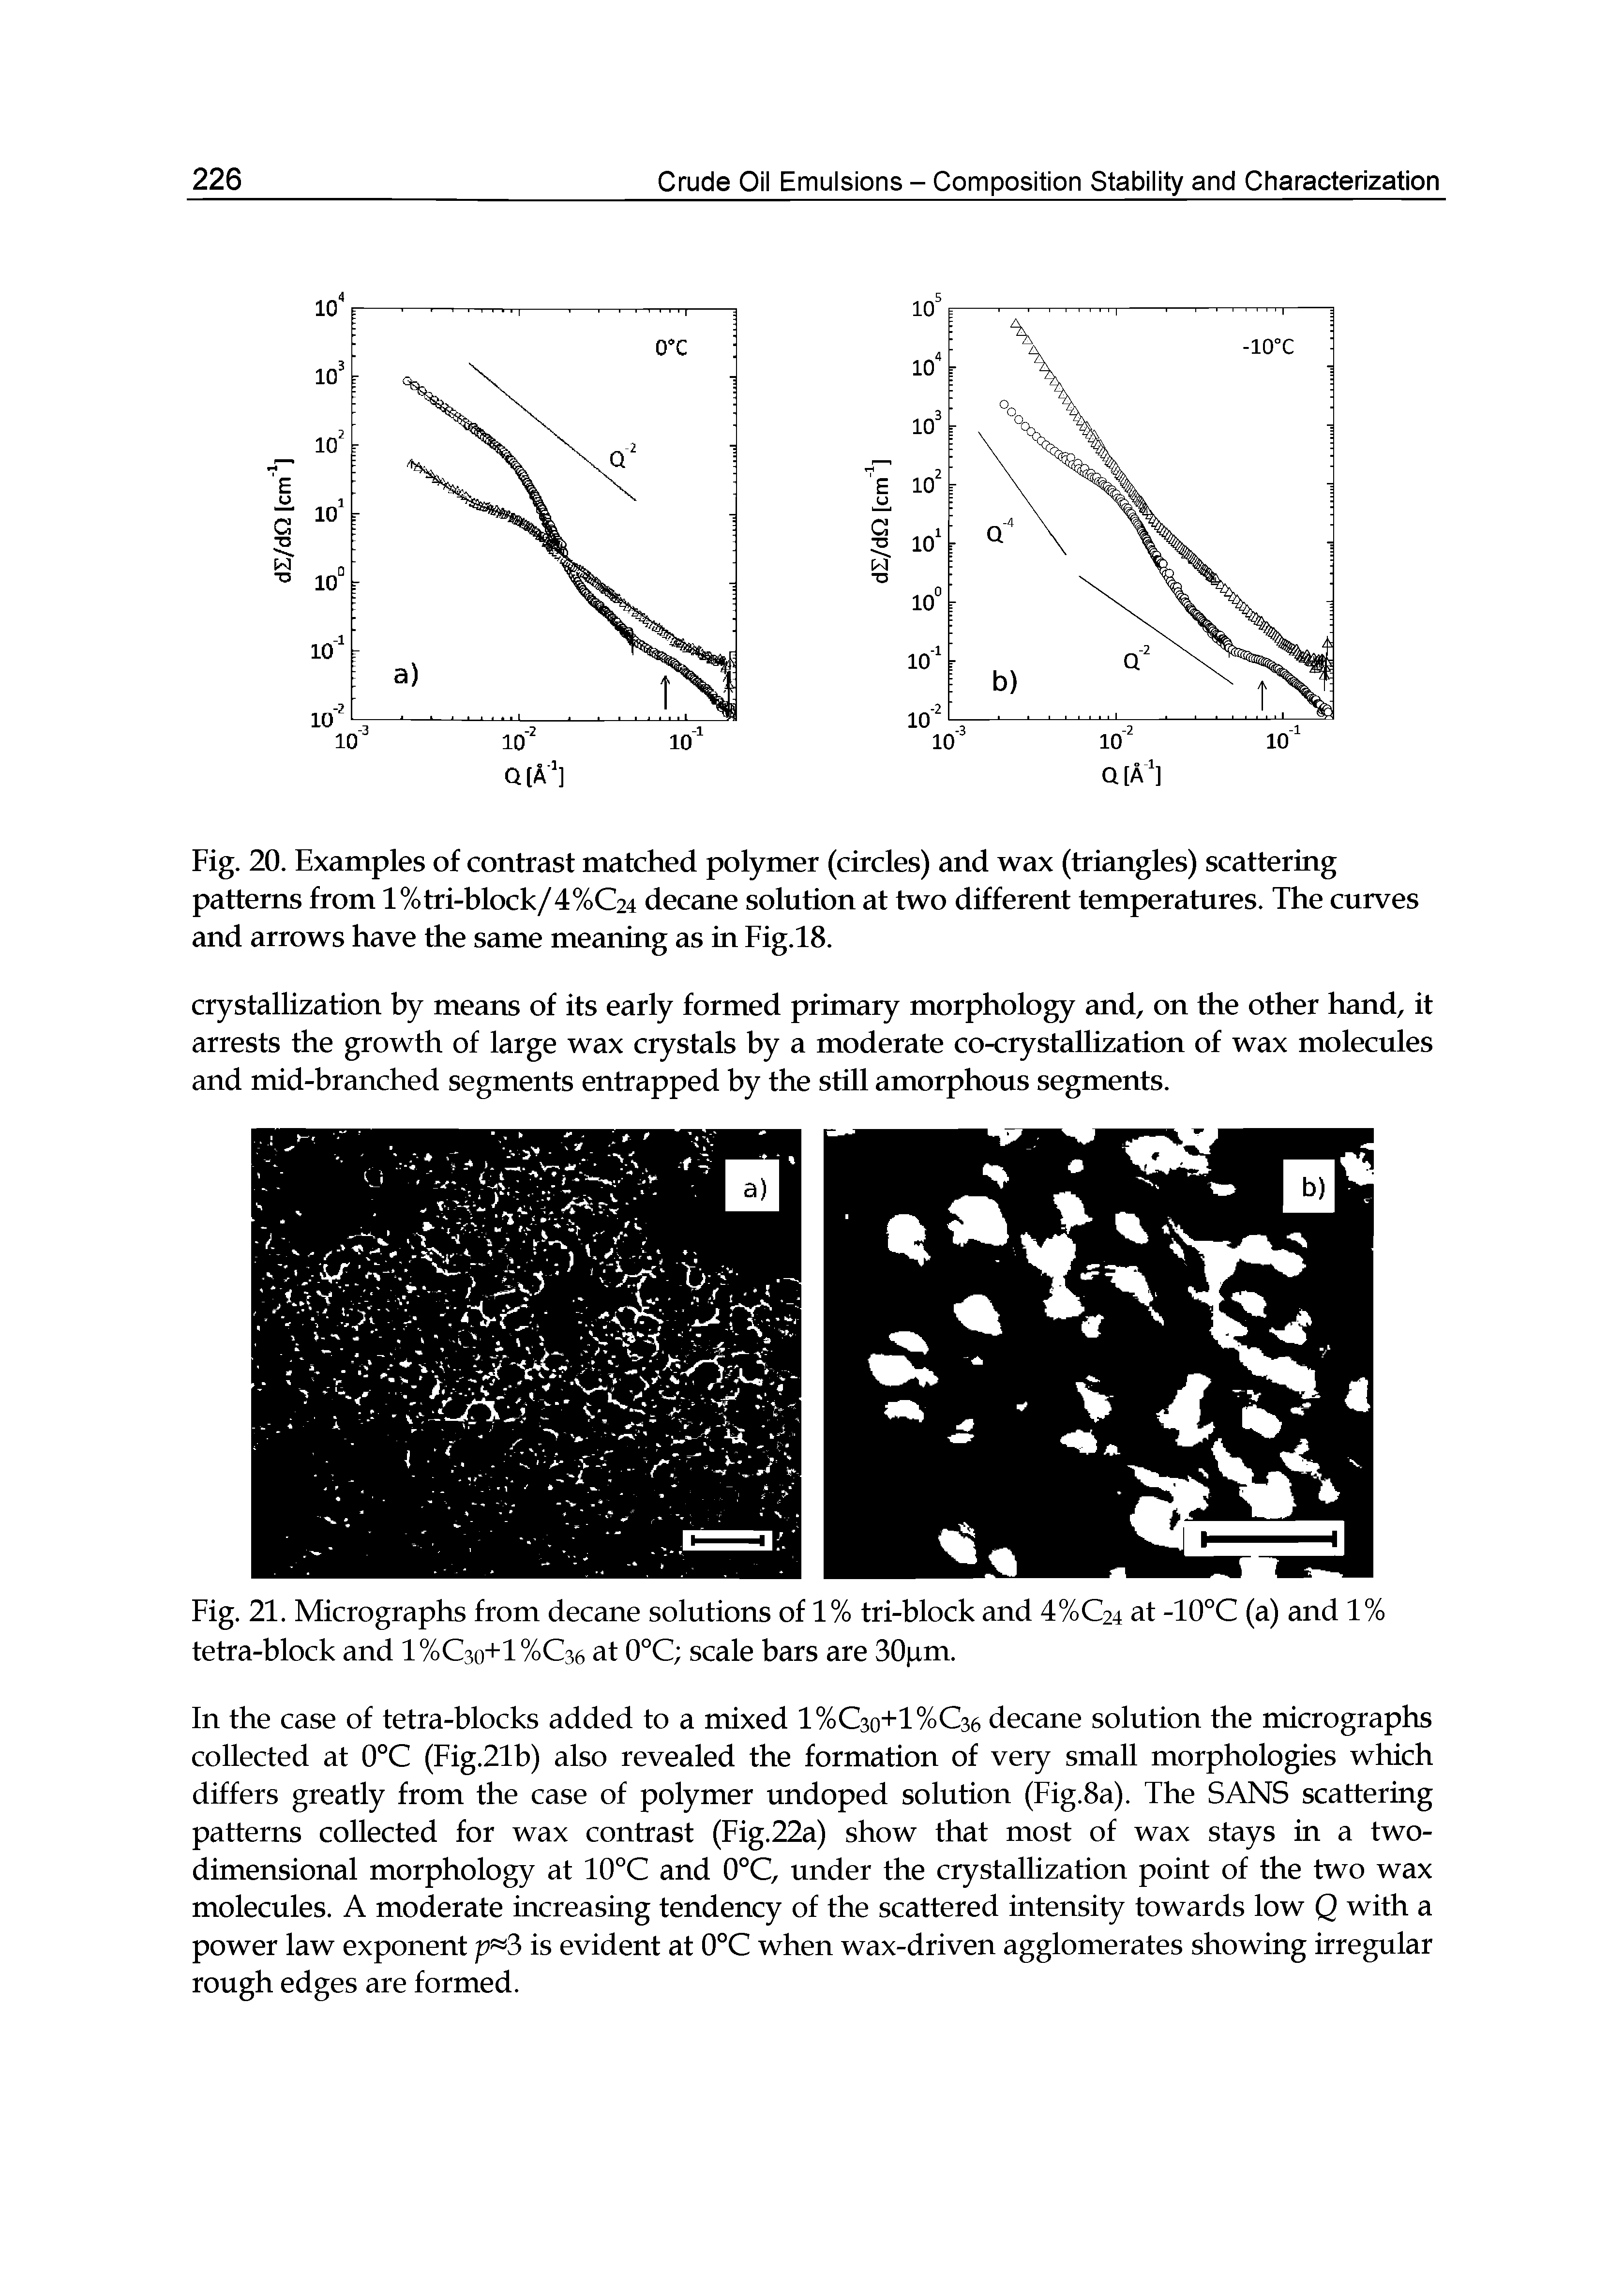 Fig. 20. Examples of contrast matched polymer (circles) and wax (triangles) scattering patterns from 1% tri-block/4 %C24 decane solution at two different temperatures. The curves and arrows have the same meaning as in Fig.18.